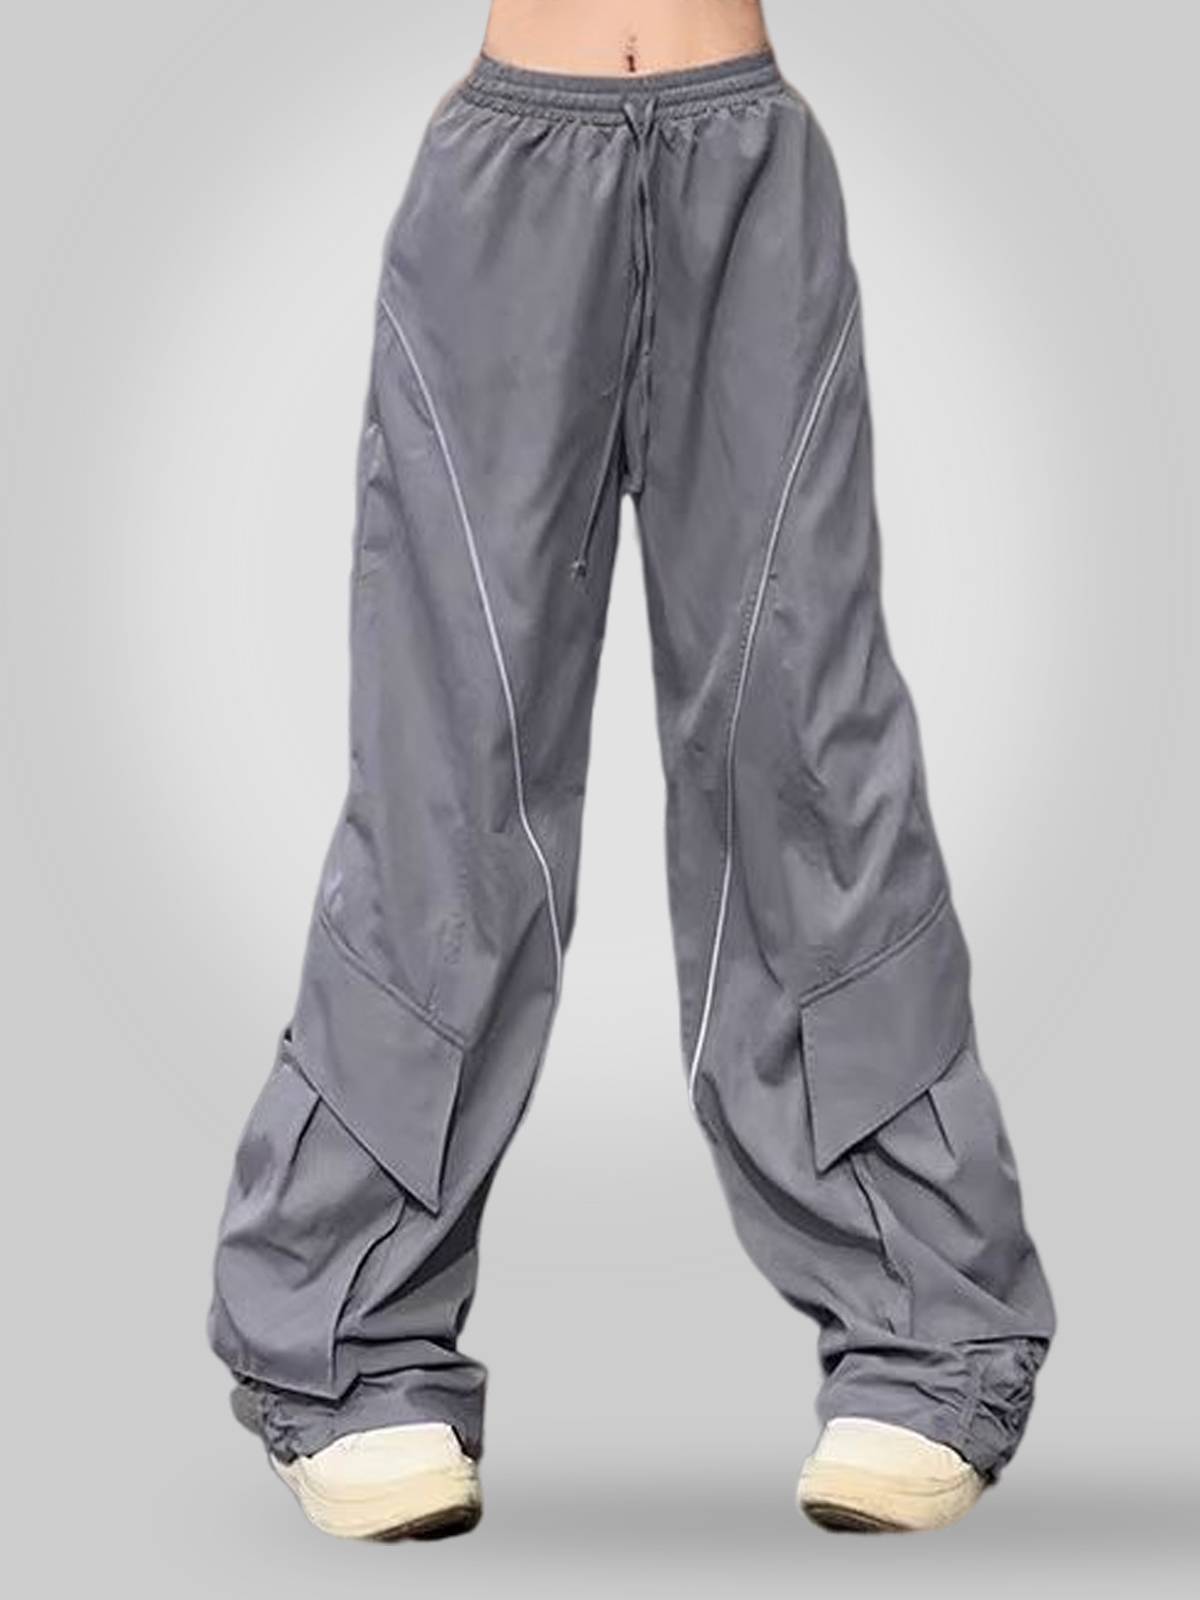 TO Pleated Line Design Cargo Pants